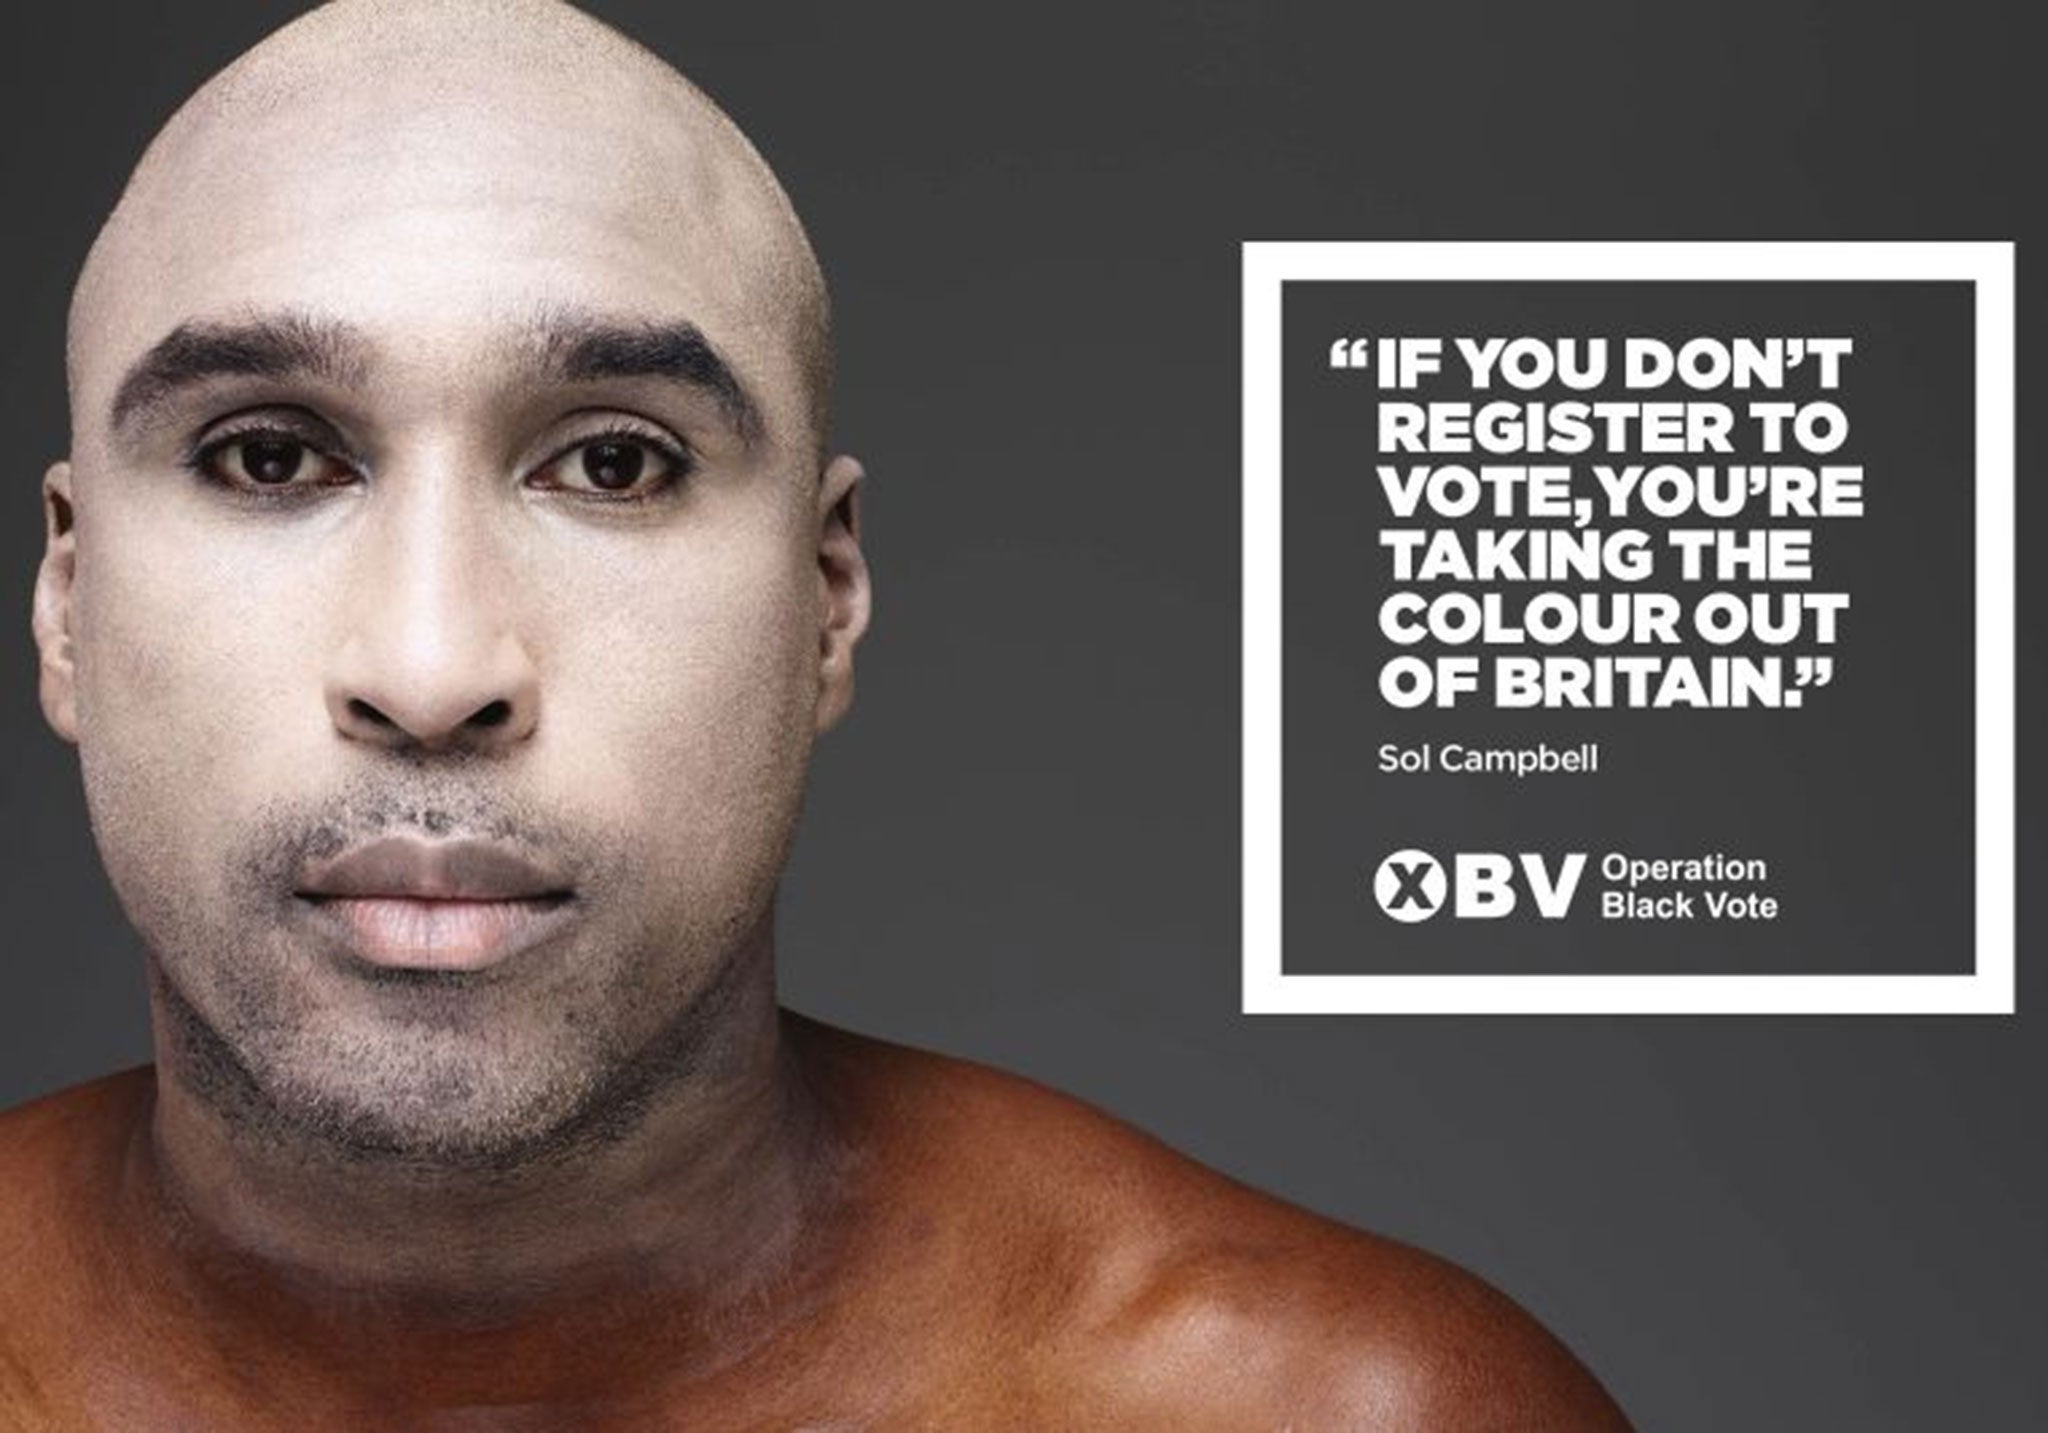 Operation Black Vote of a poster featuring Sol Campbell, one of four black British stars appearing with white faces in a hard-hitting new campaign to encourage minorities to register to vote ahead of the general election. (Rankin/Operation Black Vote/Saat